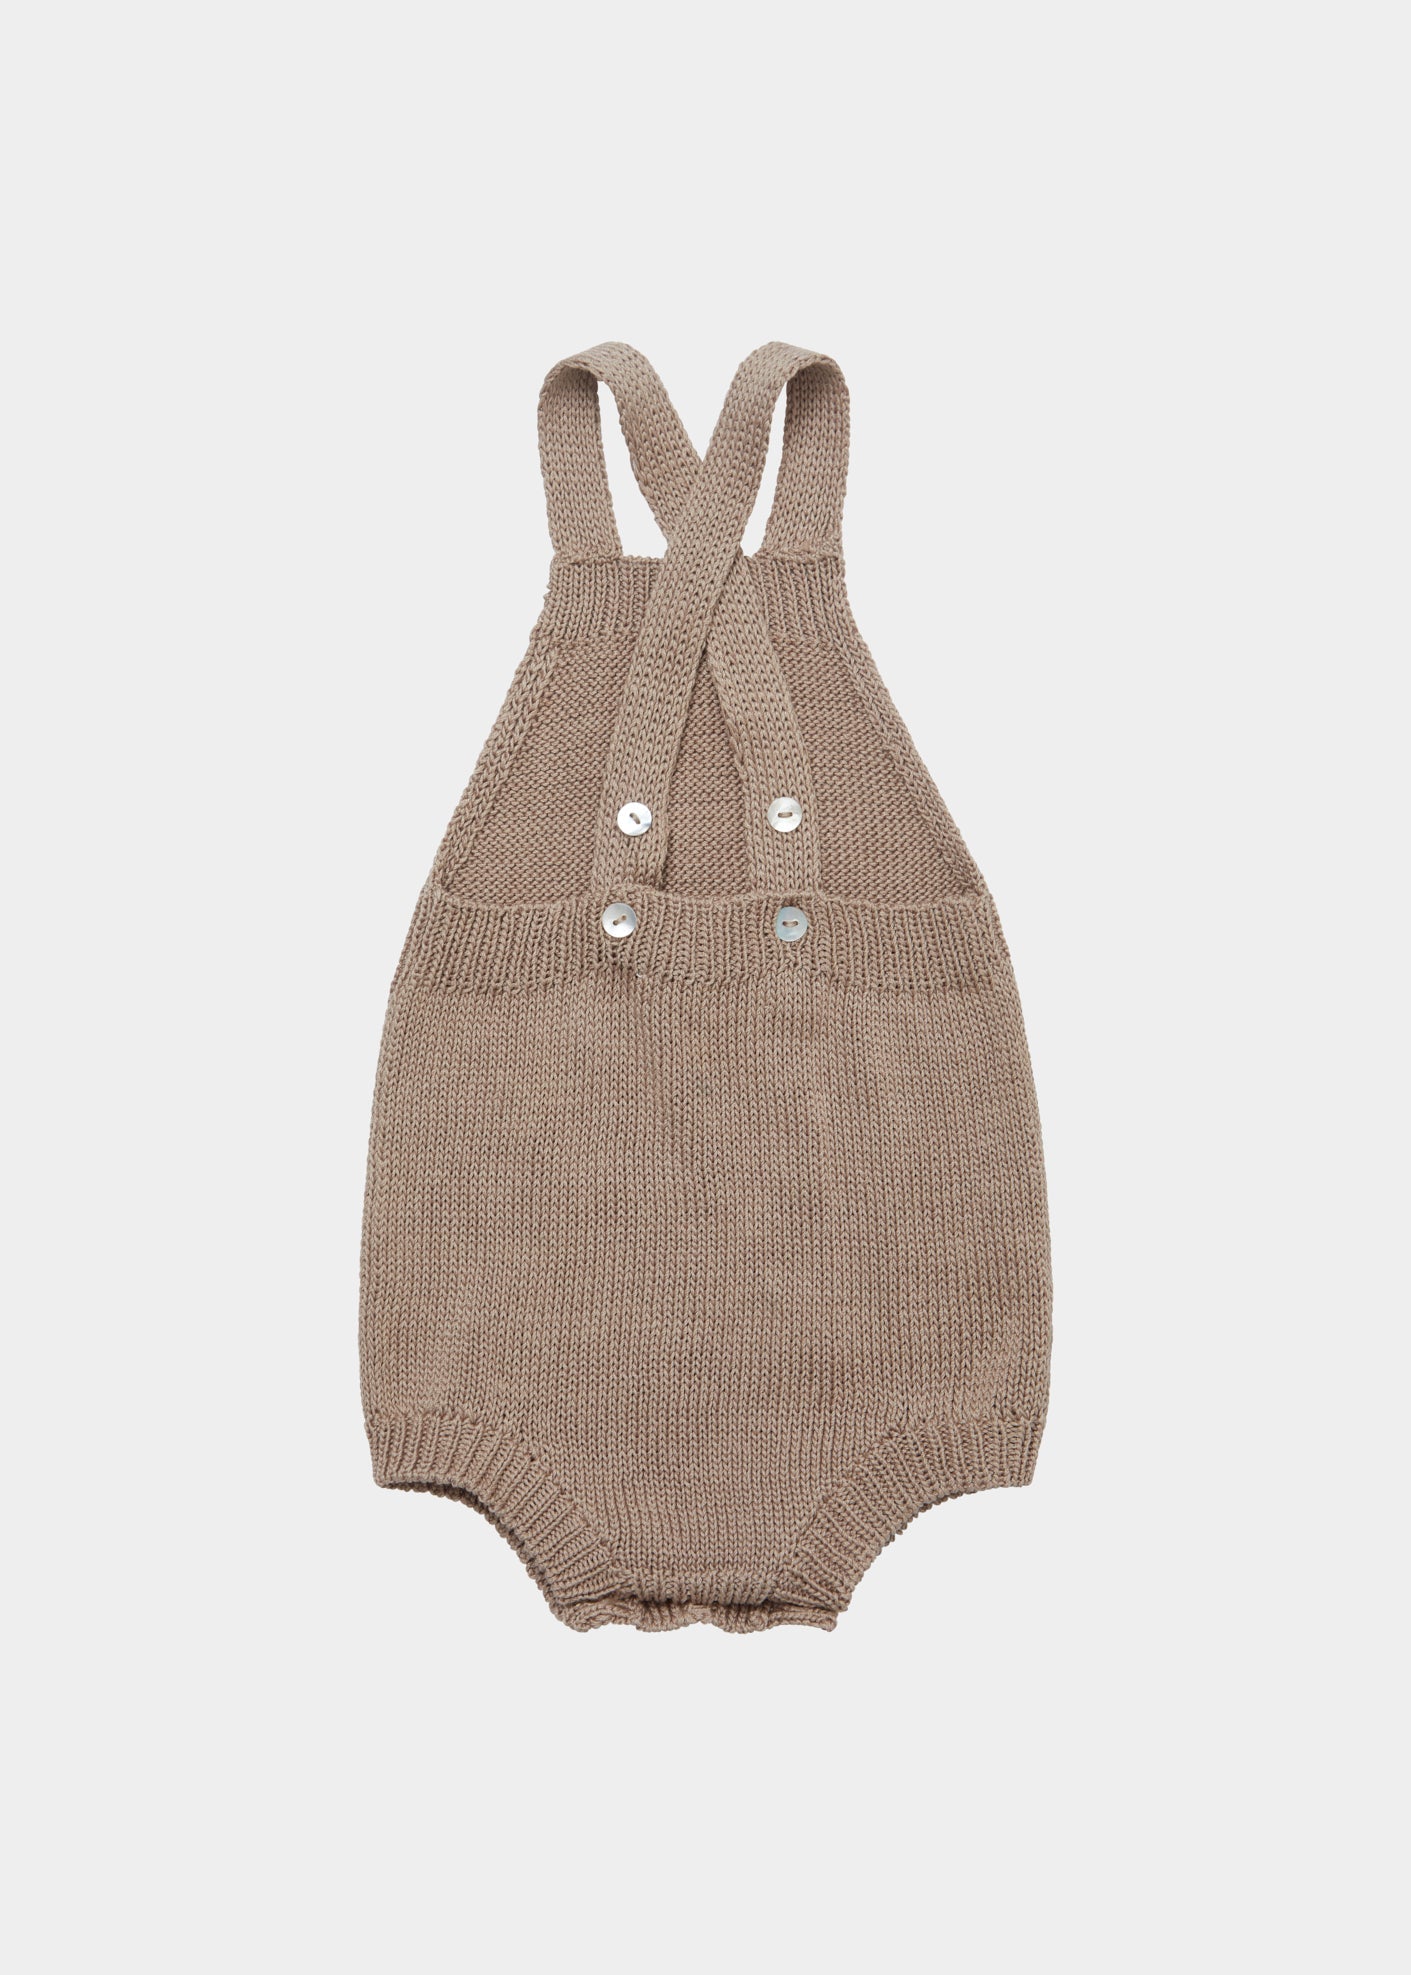 PHLOX BABY ROMPER - TAUPE